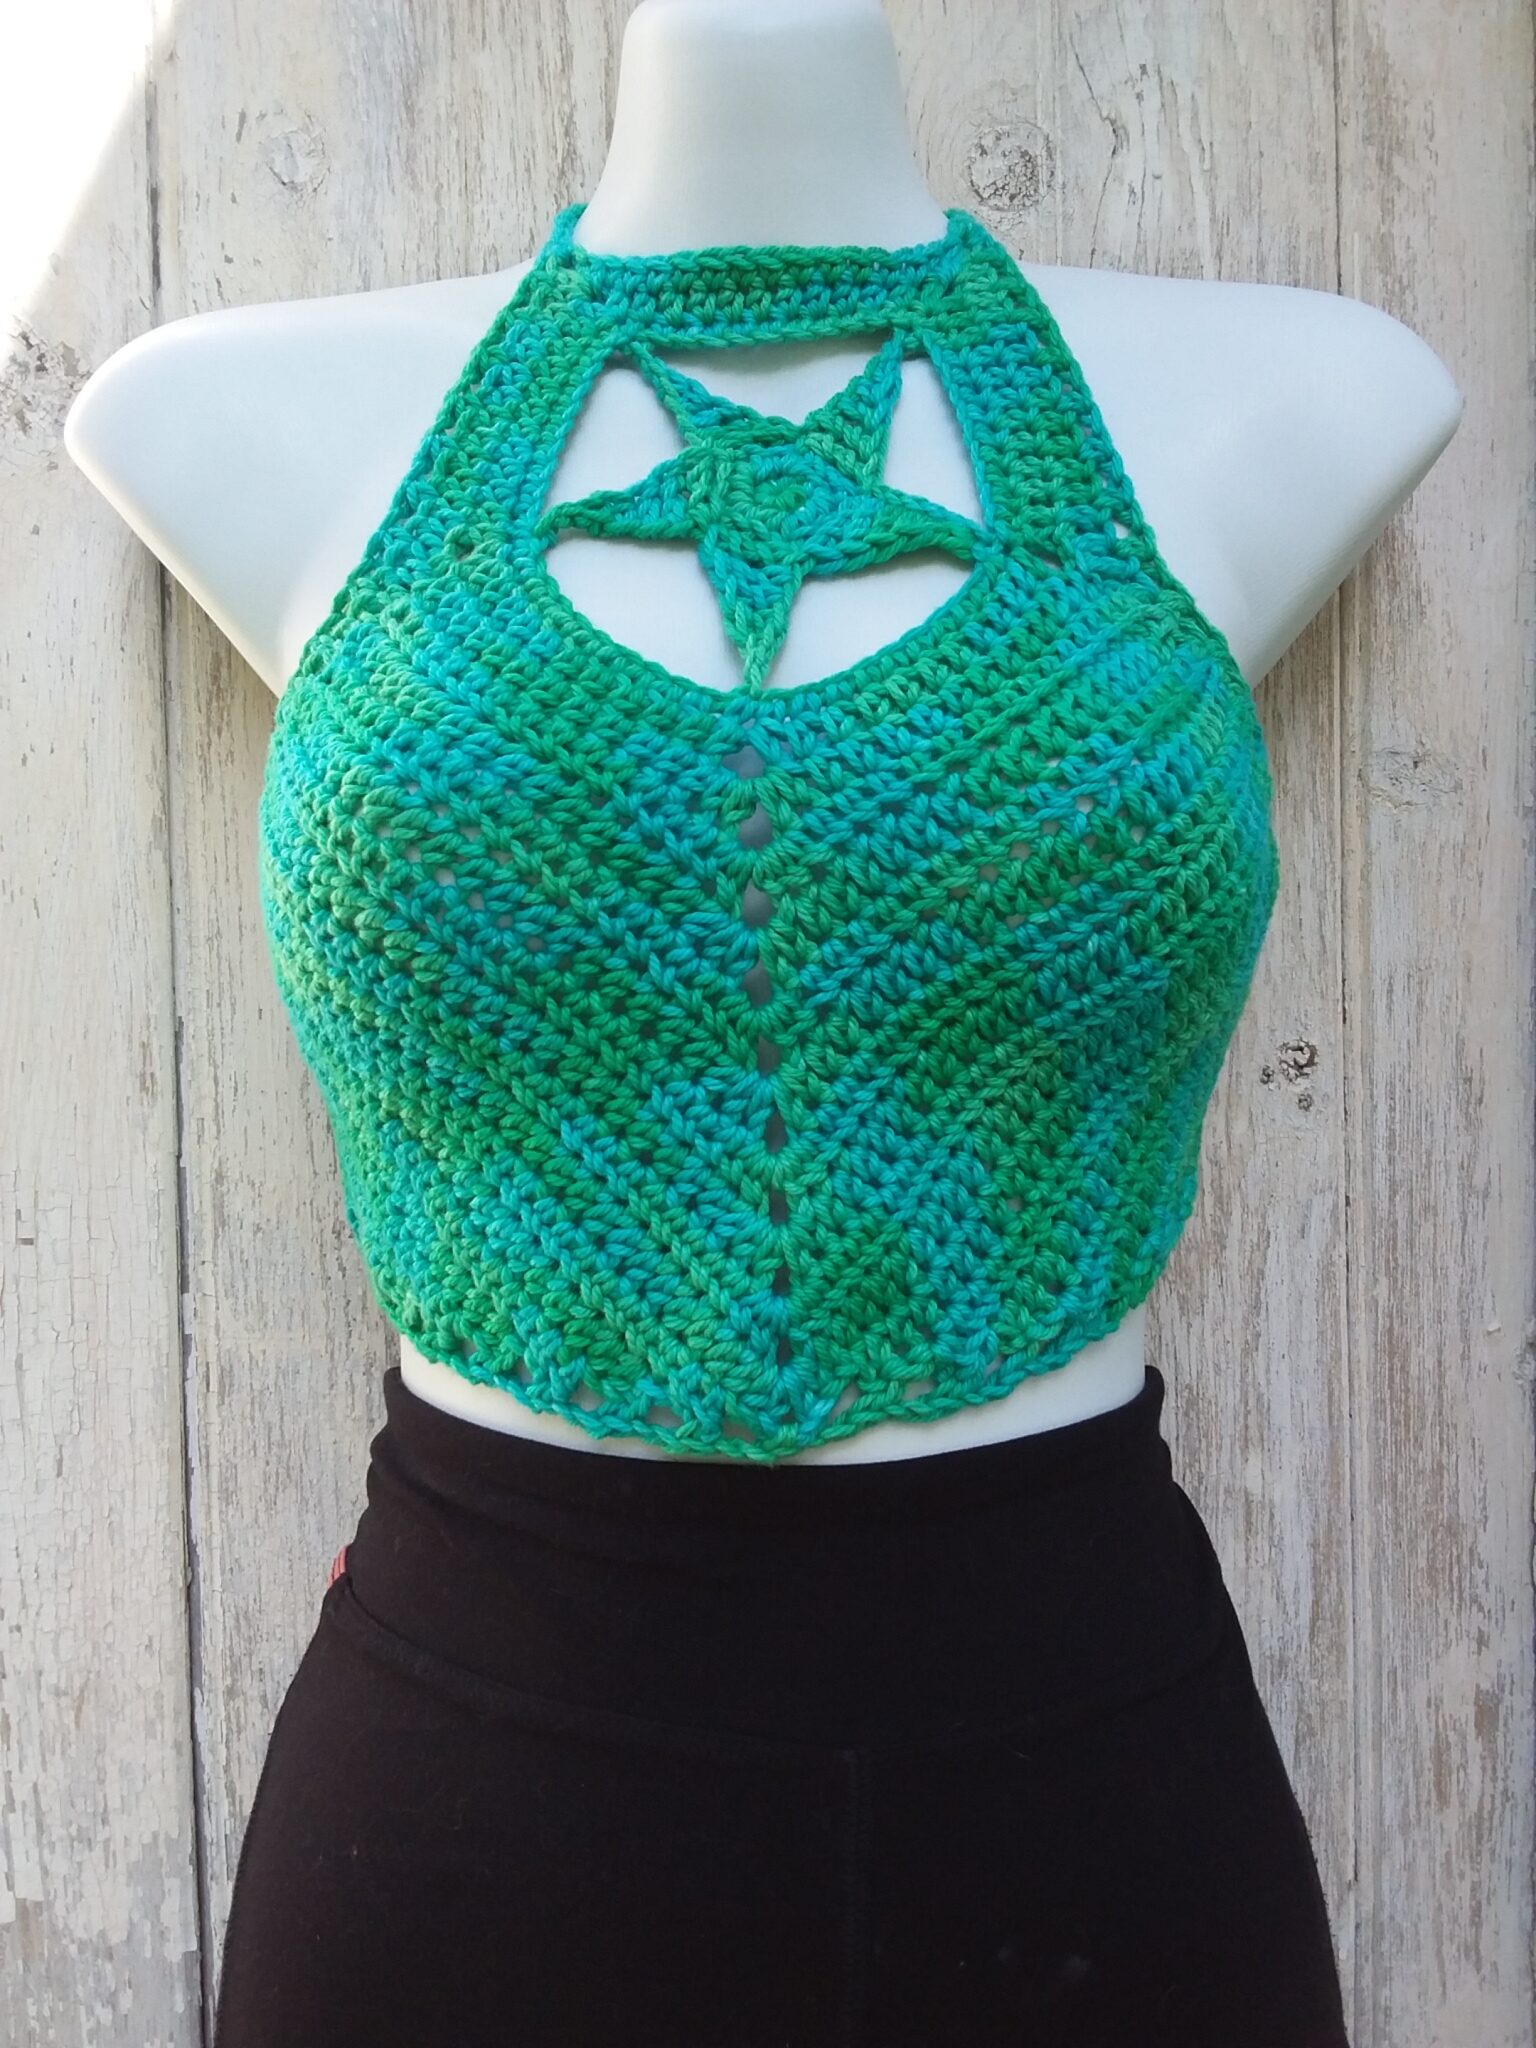 Star Crochet Crop Top Halter, Hand Dyed Organic Cotton, Cup Size A-C, RE.STATEMENT